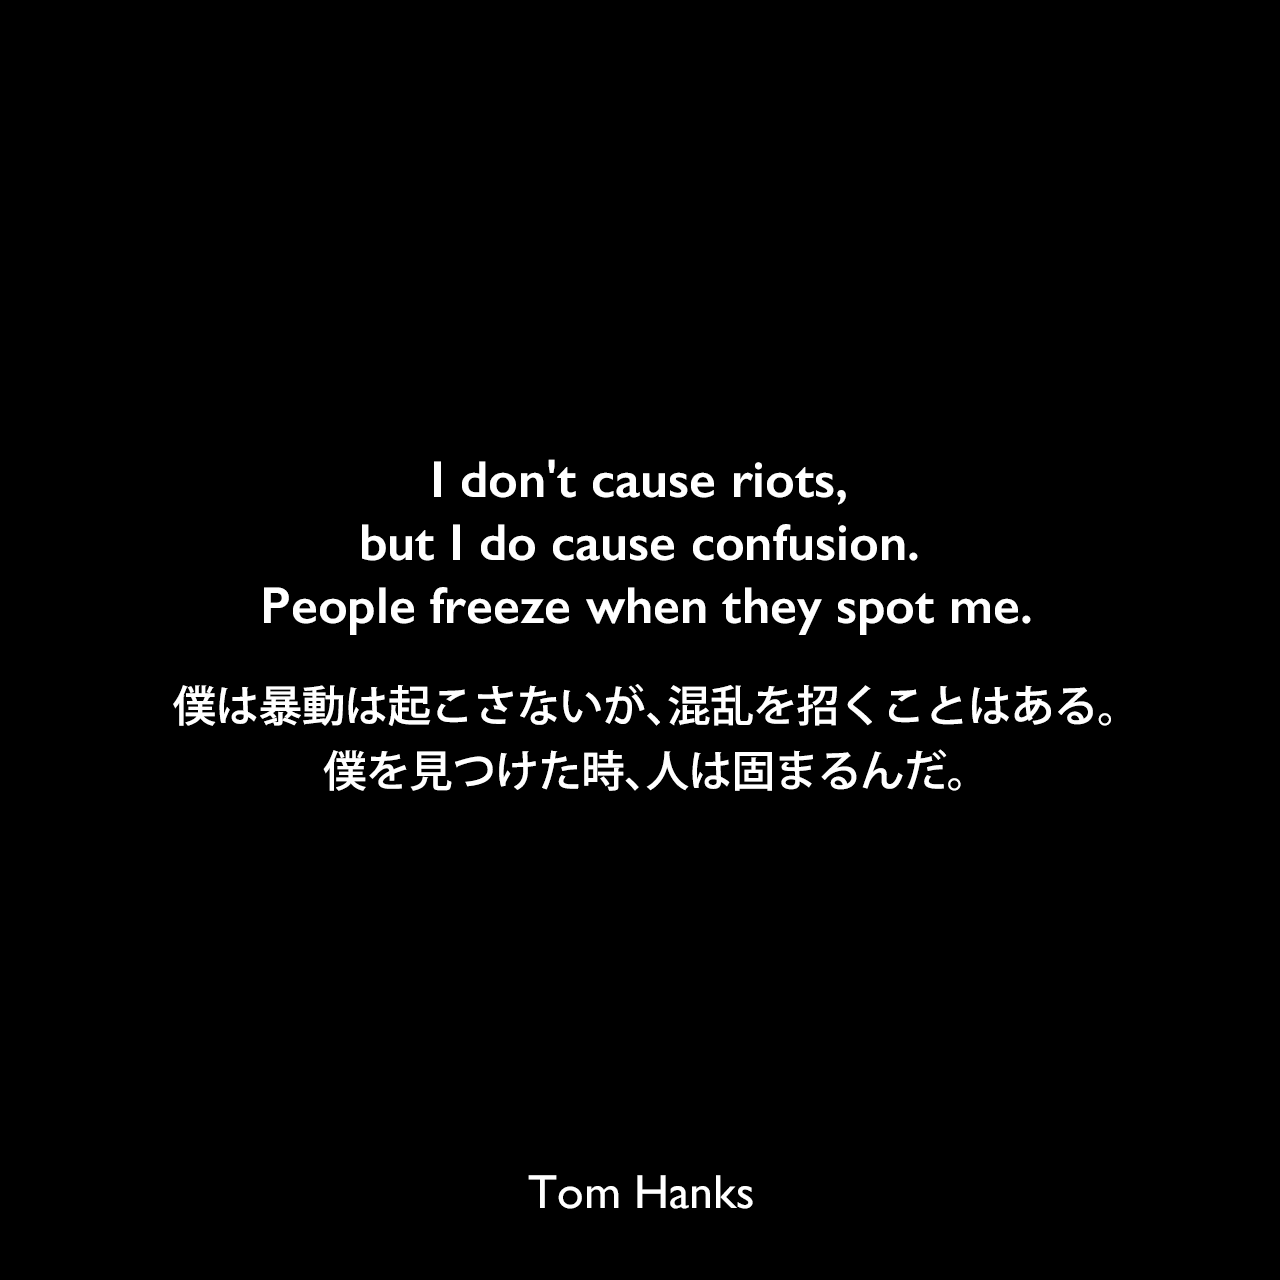 I don't cause riots, but I do cause confusion. People freeze when they spot me.僕は暴動は起こさないが、混乱を招くことはある。僕を見つけた時、人は固まるんだ。Tom Hanks